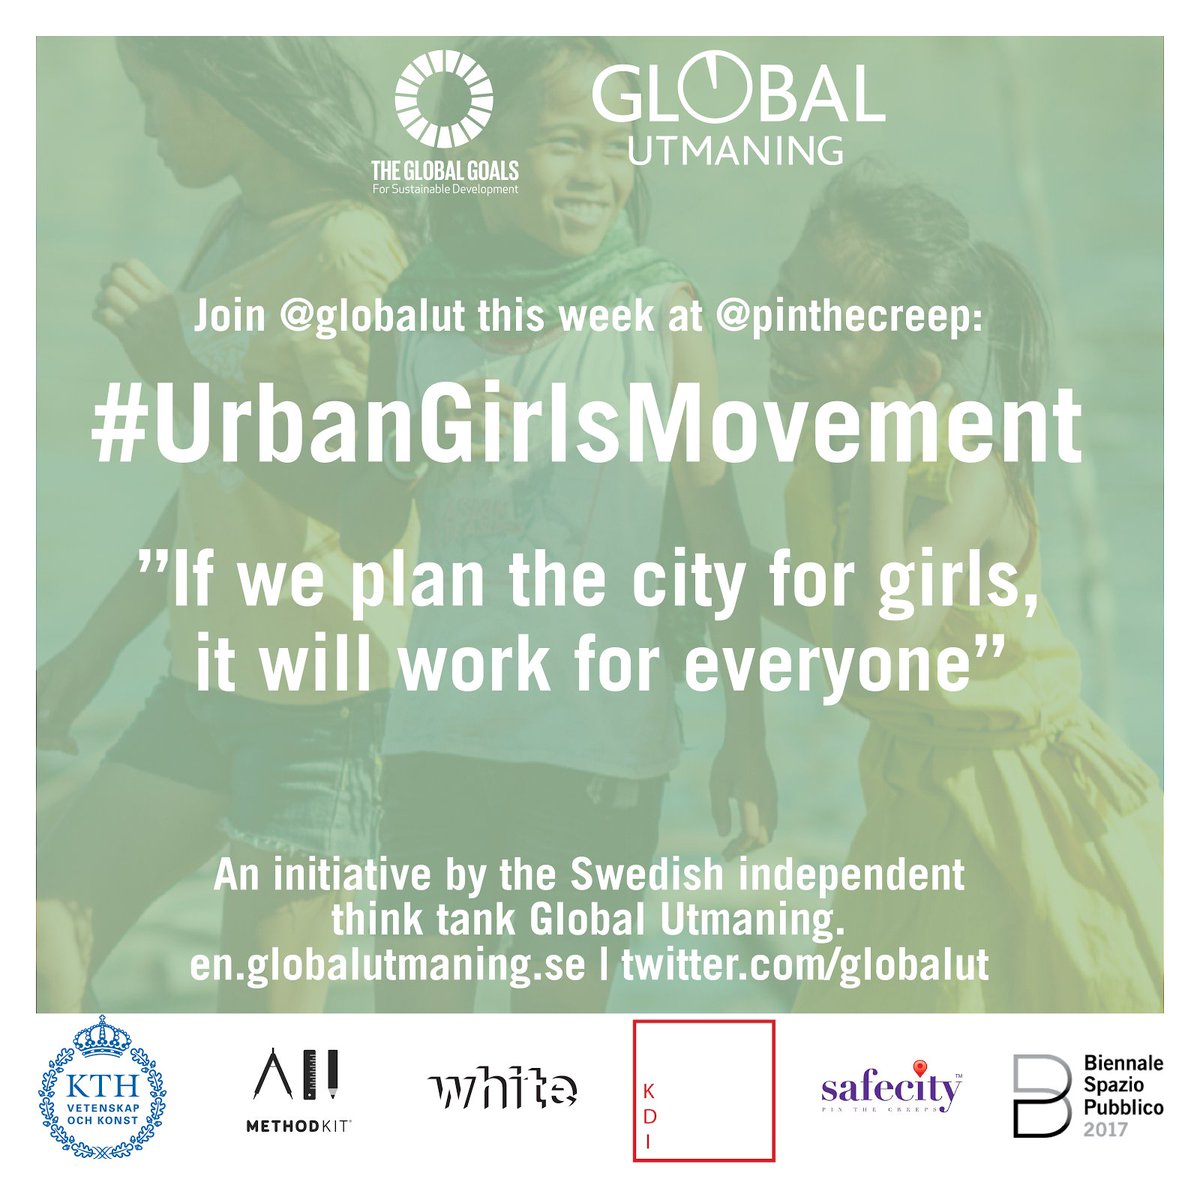 Happy #AntiStreetHarassment week everyone! @GlobalUt is curating this week and sharing examples from our initiative #UrbanGirlsMovement